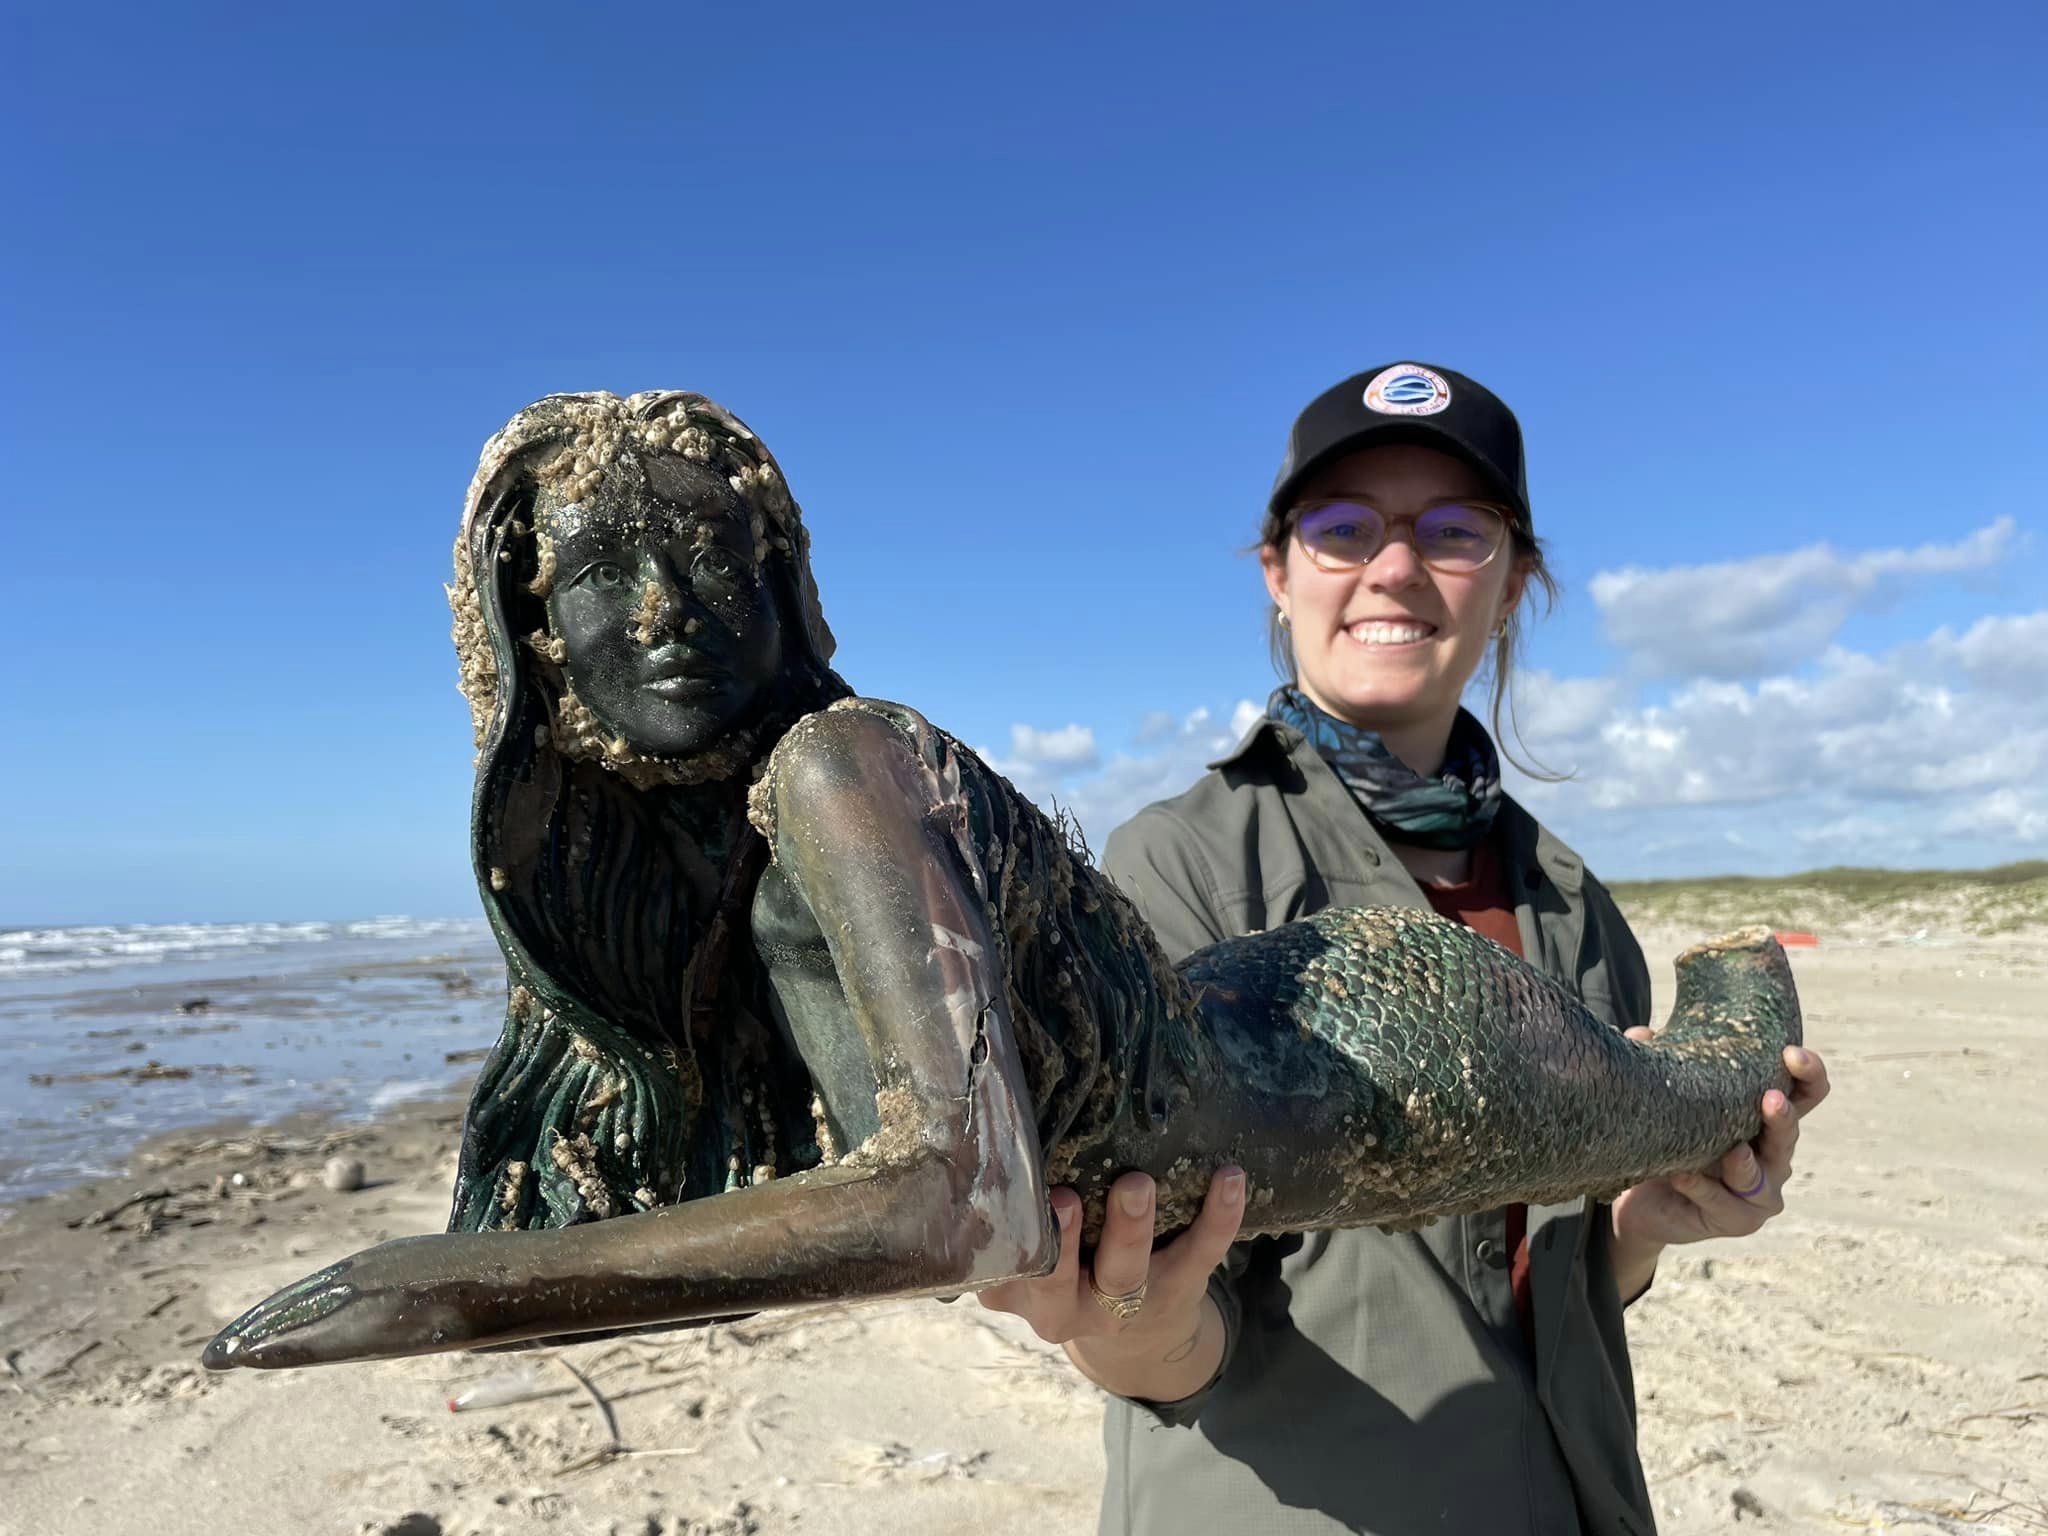 Creepy dolls washing ashore in Texas are being used to help birds